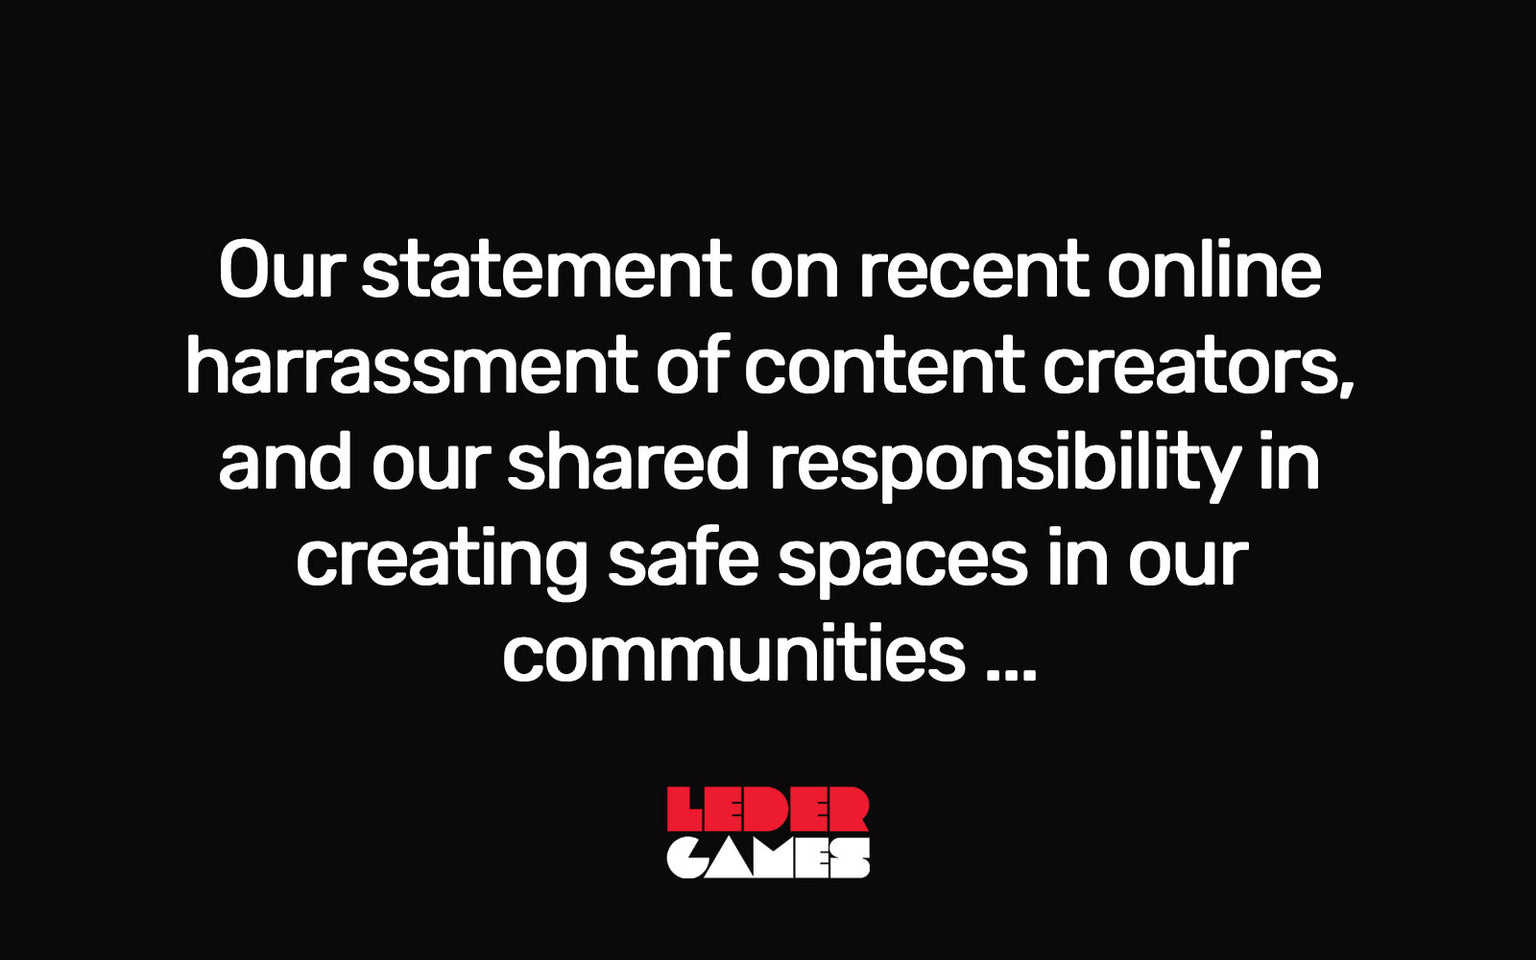 Our statement on recent online harassment of content creators, and our shared responsibility in creating safe spaces in our communities.